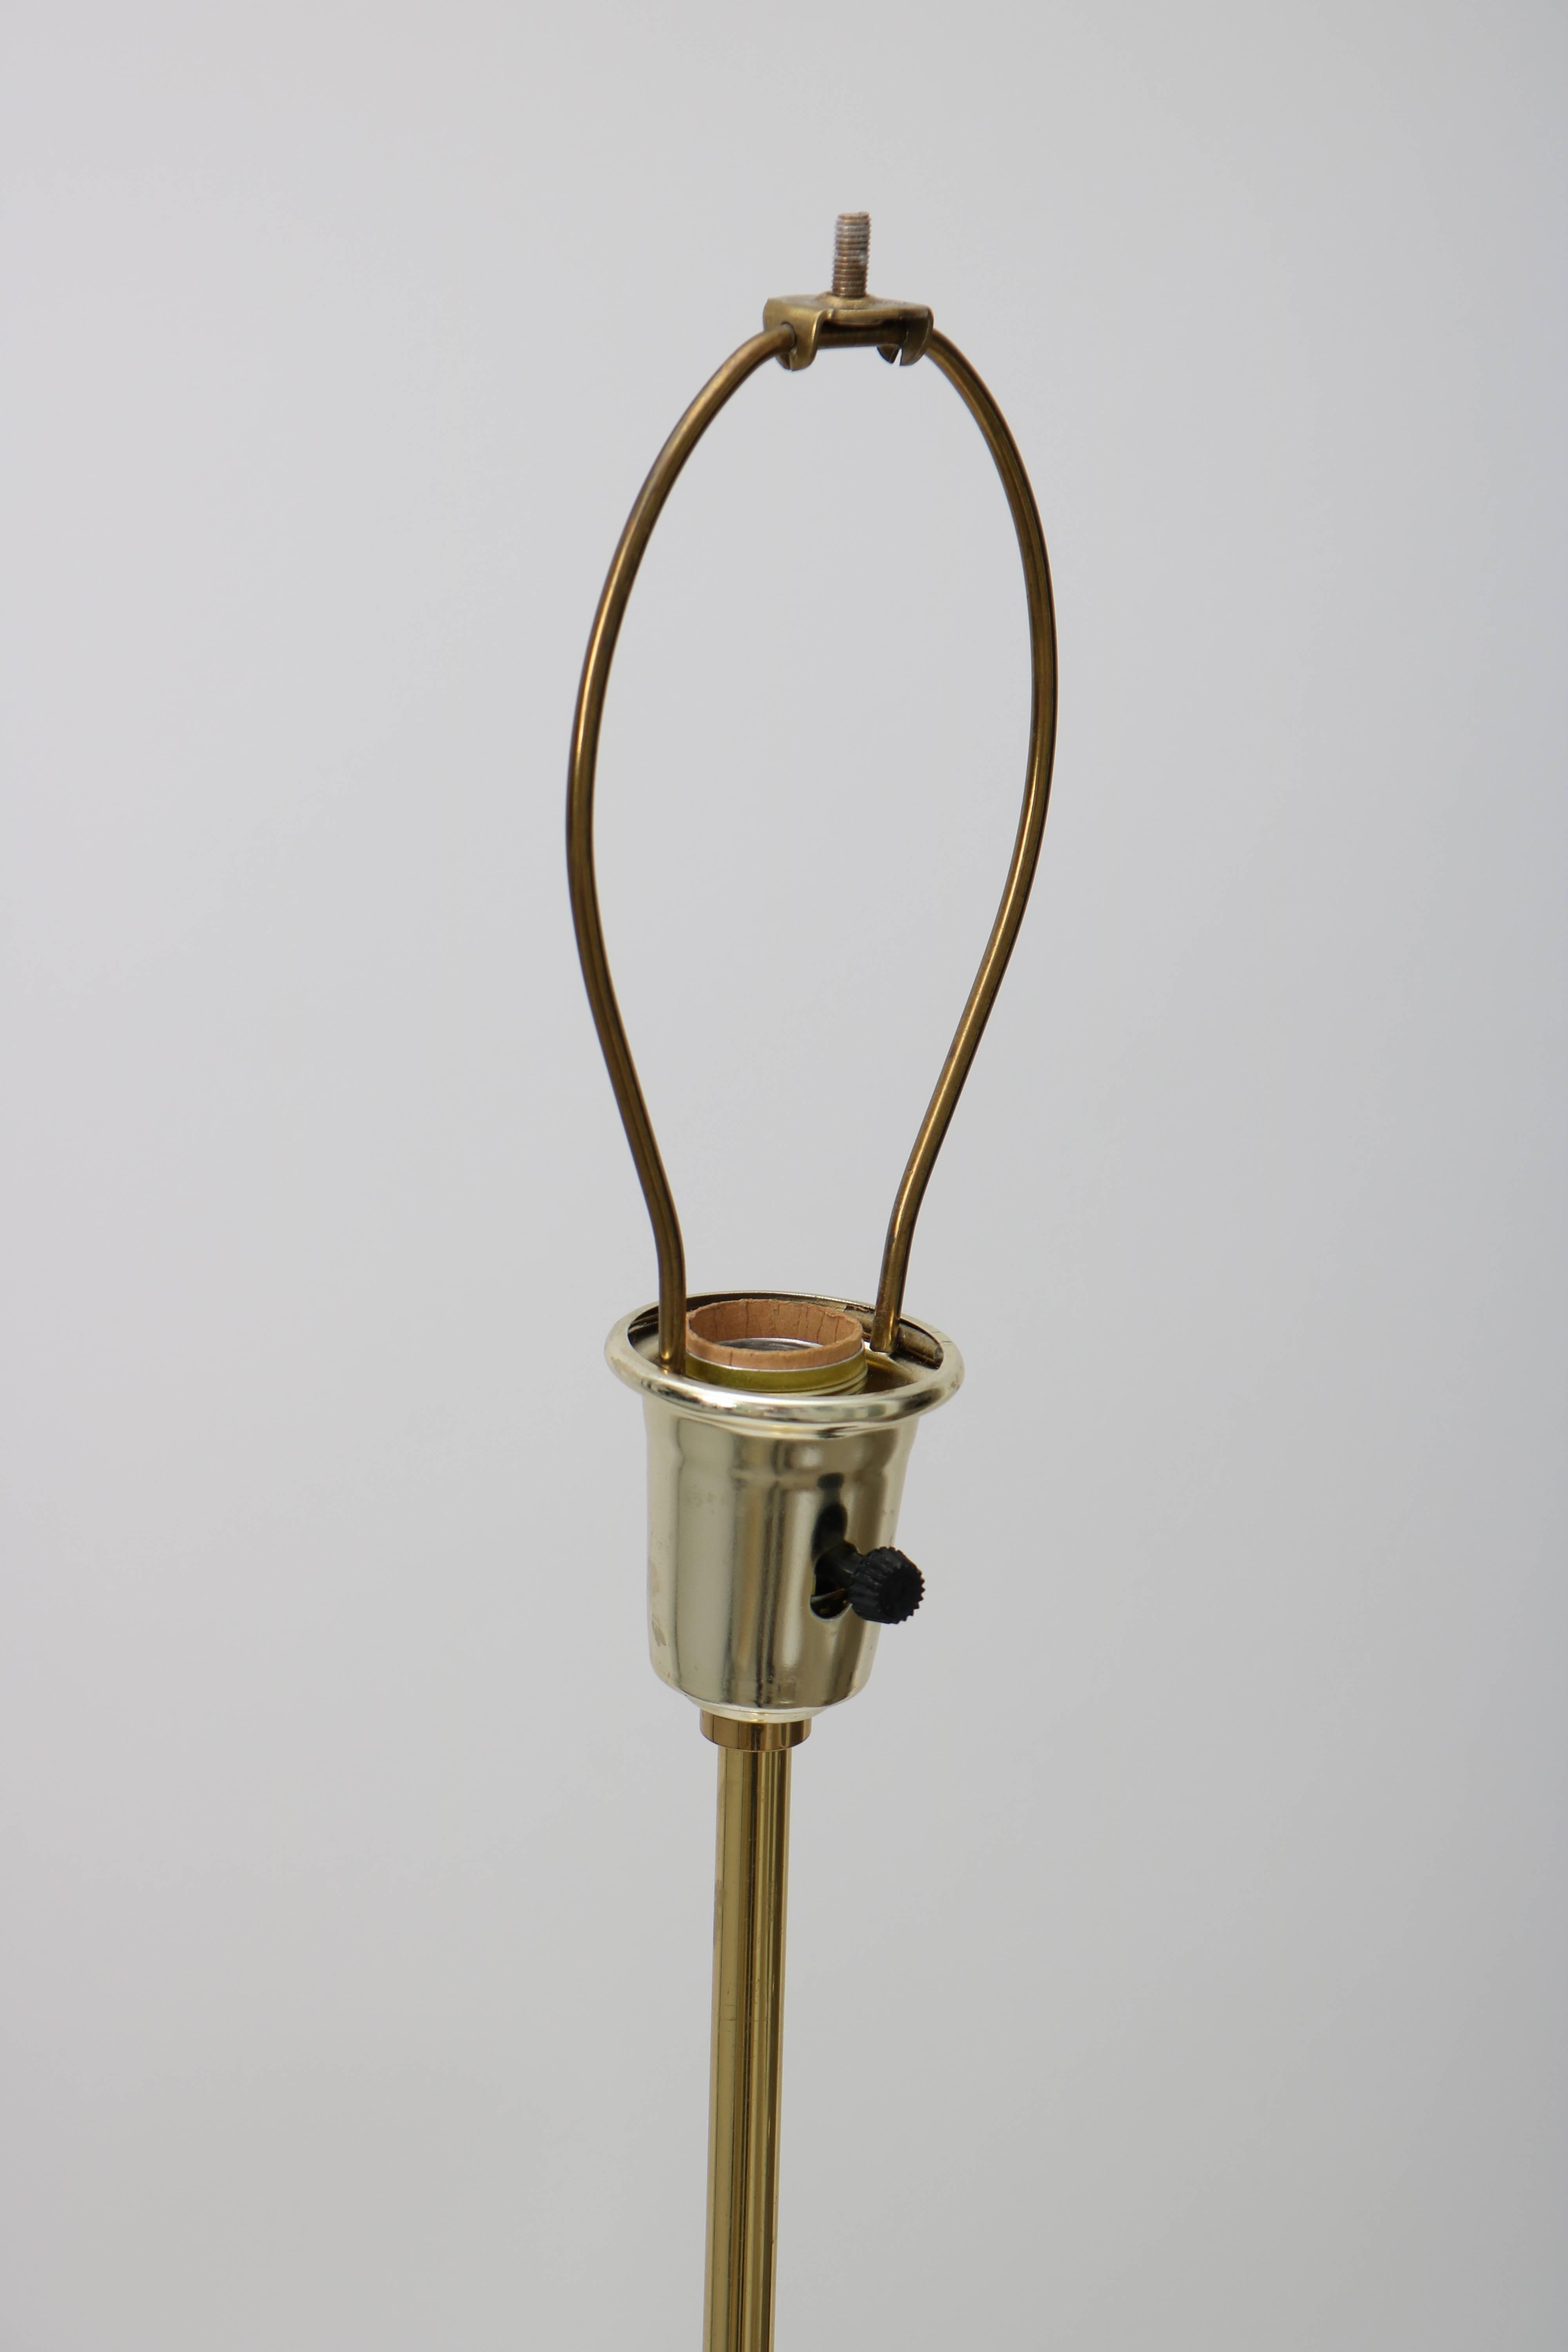 American  Adjustable Floor Lamp in Polished Brass and Lucite